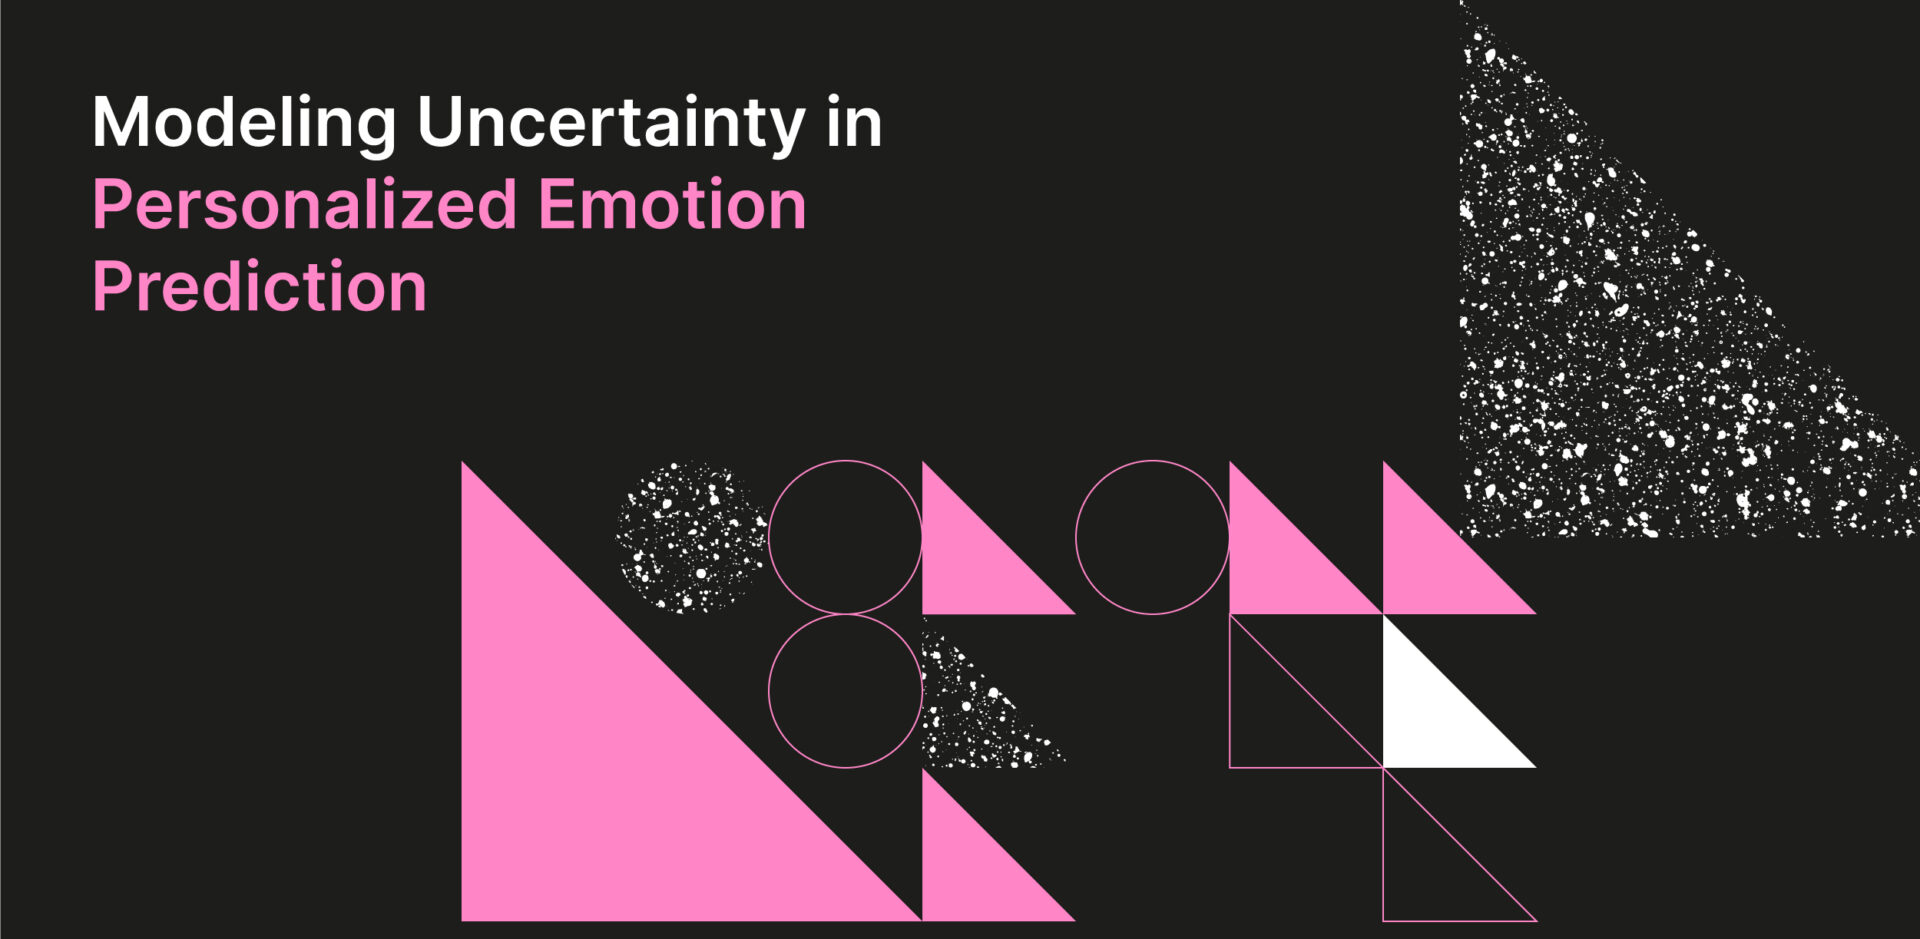 Modeling Uncertainty in Personalized Emotion Prediction - Tooploox research paper